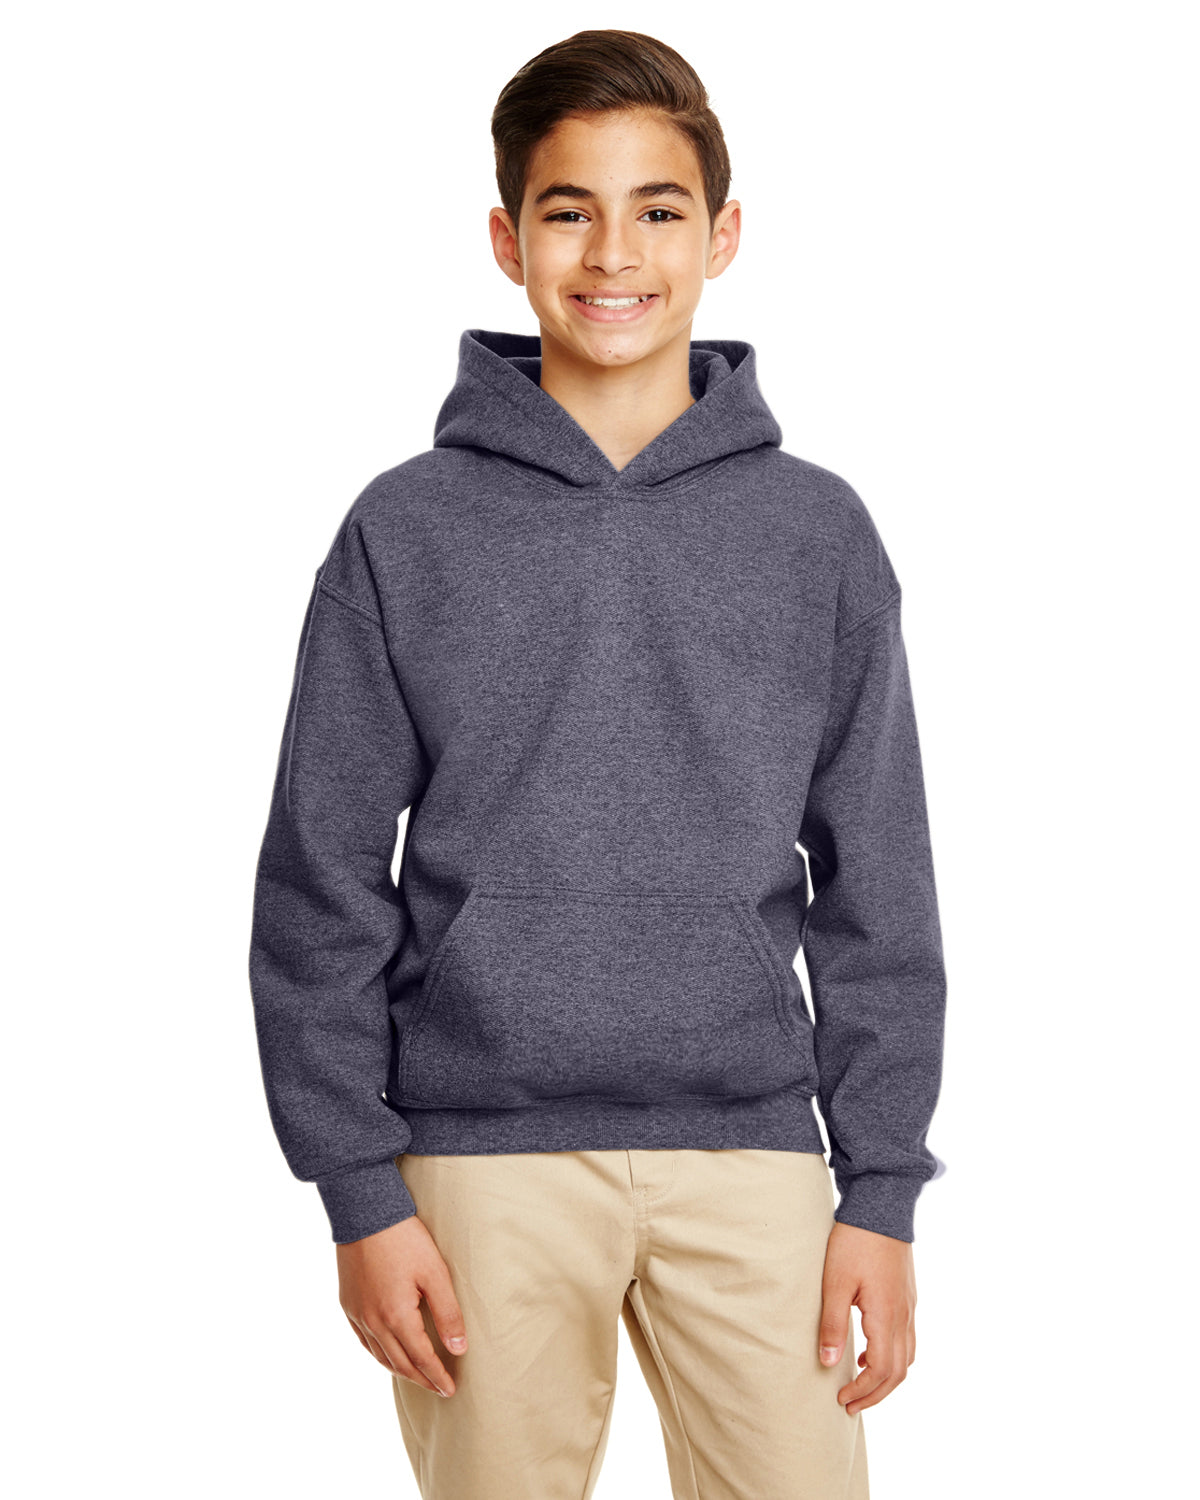 Holly’s Favorite YOUTH Basic Hooded Sweatshirt